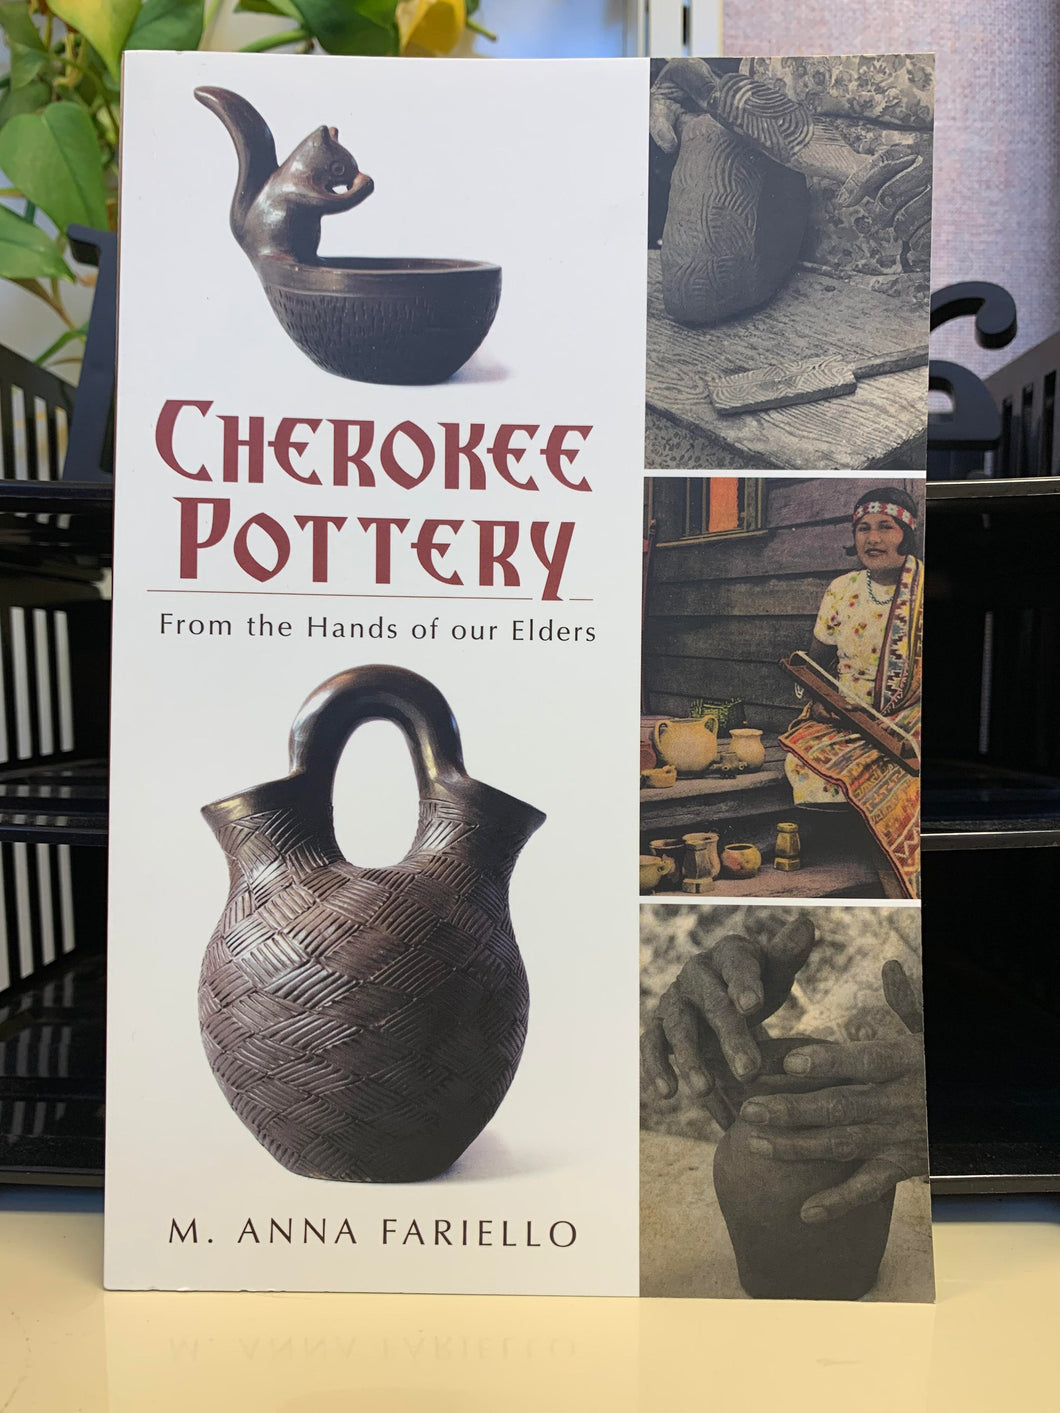 Cherokee Pottery: From the Hands of our Elders by M. Anna Fariello